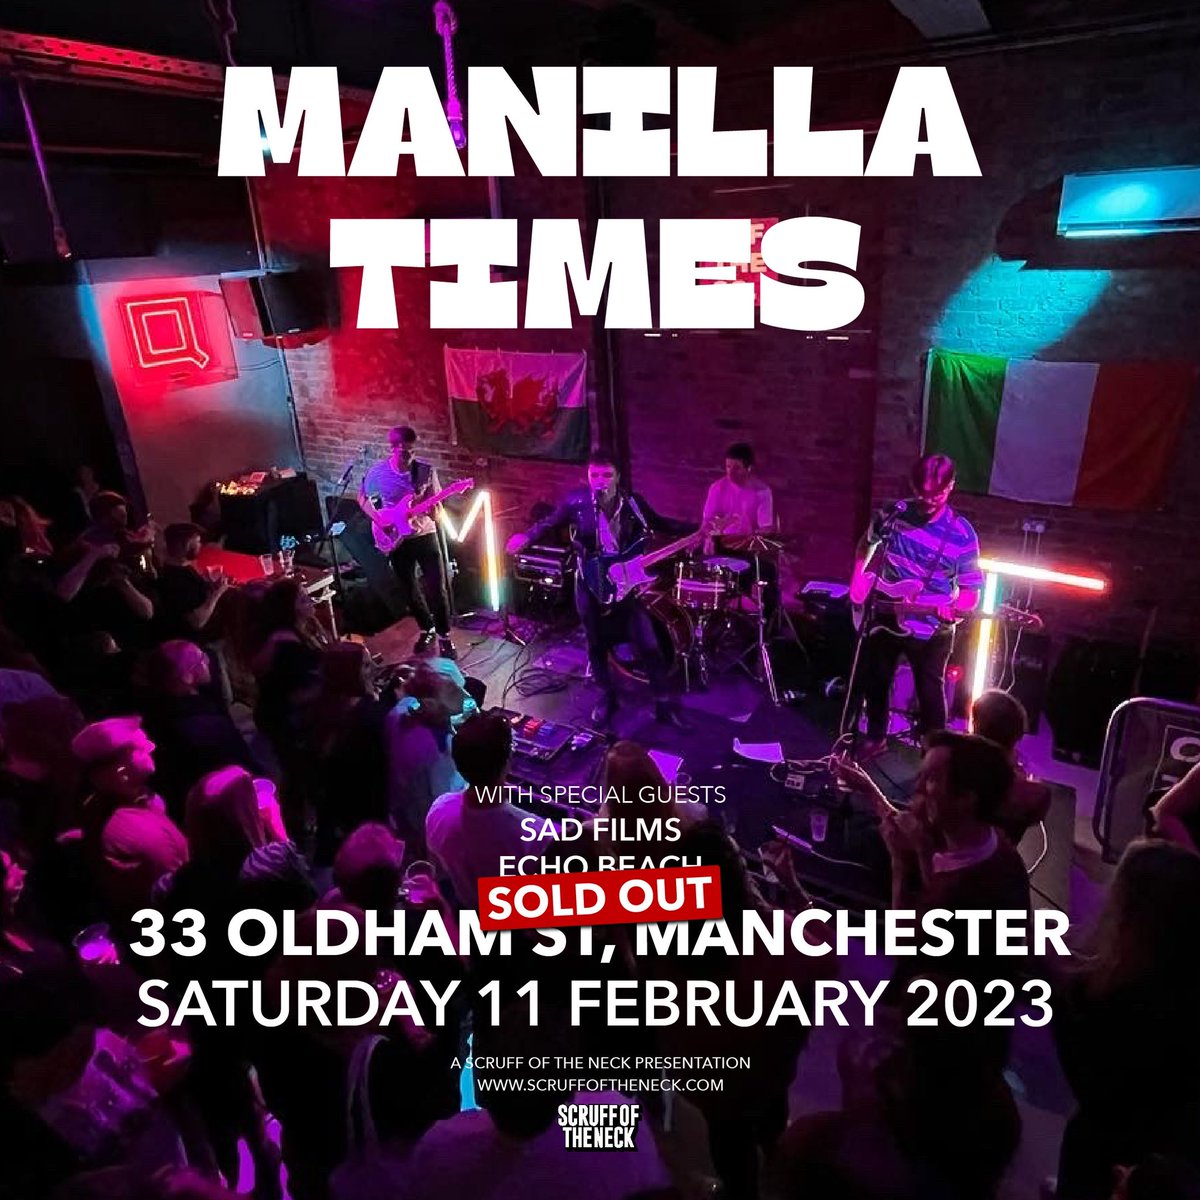 Manchester tonight, and it’s LIIIIIIVEEEE
@33_oldhamstreet 

Oh and it’s sold out 🎉

SET TIMES
Doors 7:30pm
@echobeach_uk 7:45pm
sad films (too cool for Twitter) 8:30pm
Gorilla Crimes 9:15pm
Curfew 11pm

Get down early folks. It’s gonna be a belter x

@scruffoftheneck